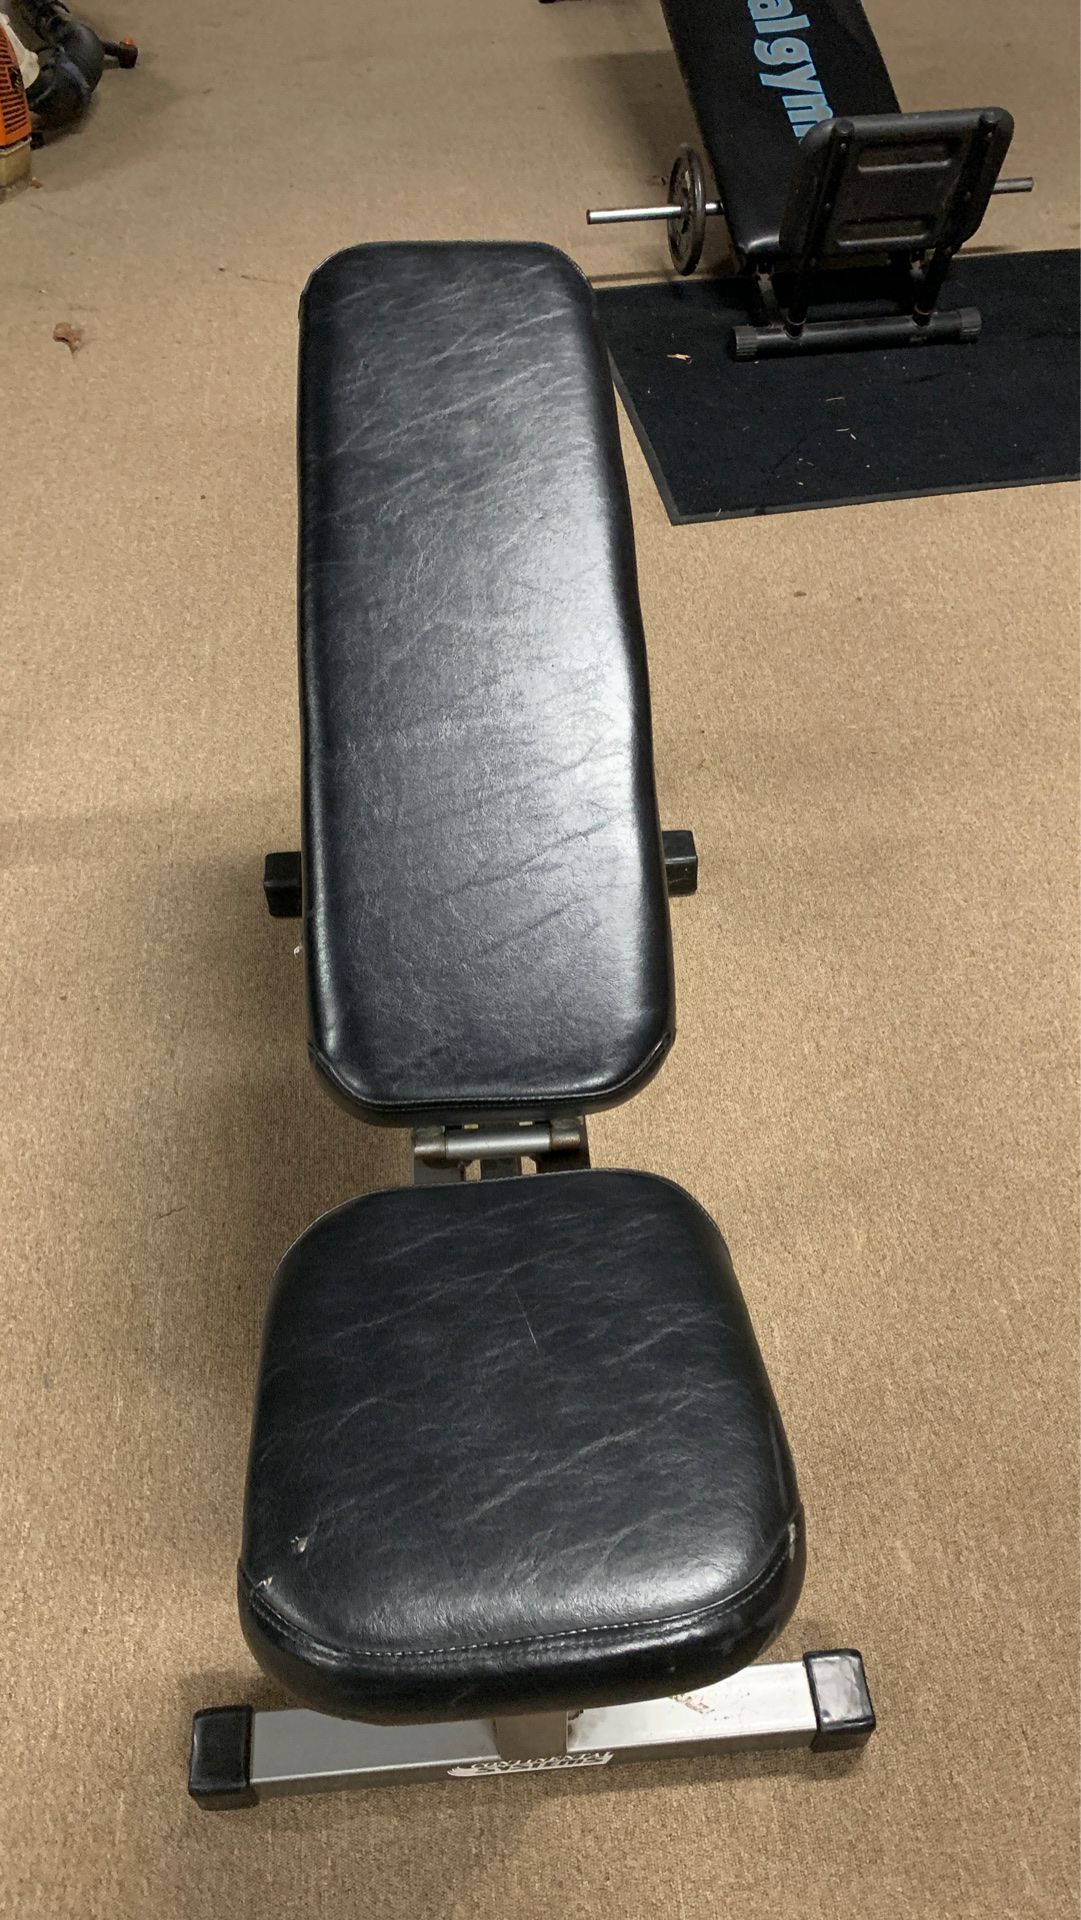 Adjustable Weight Bench. Incline decline almost new. $85.00.